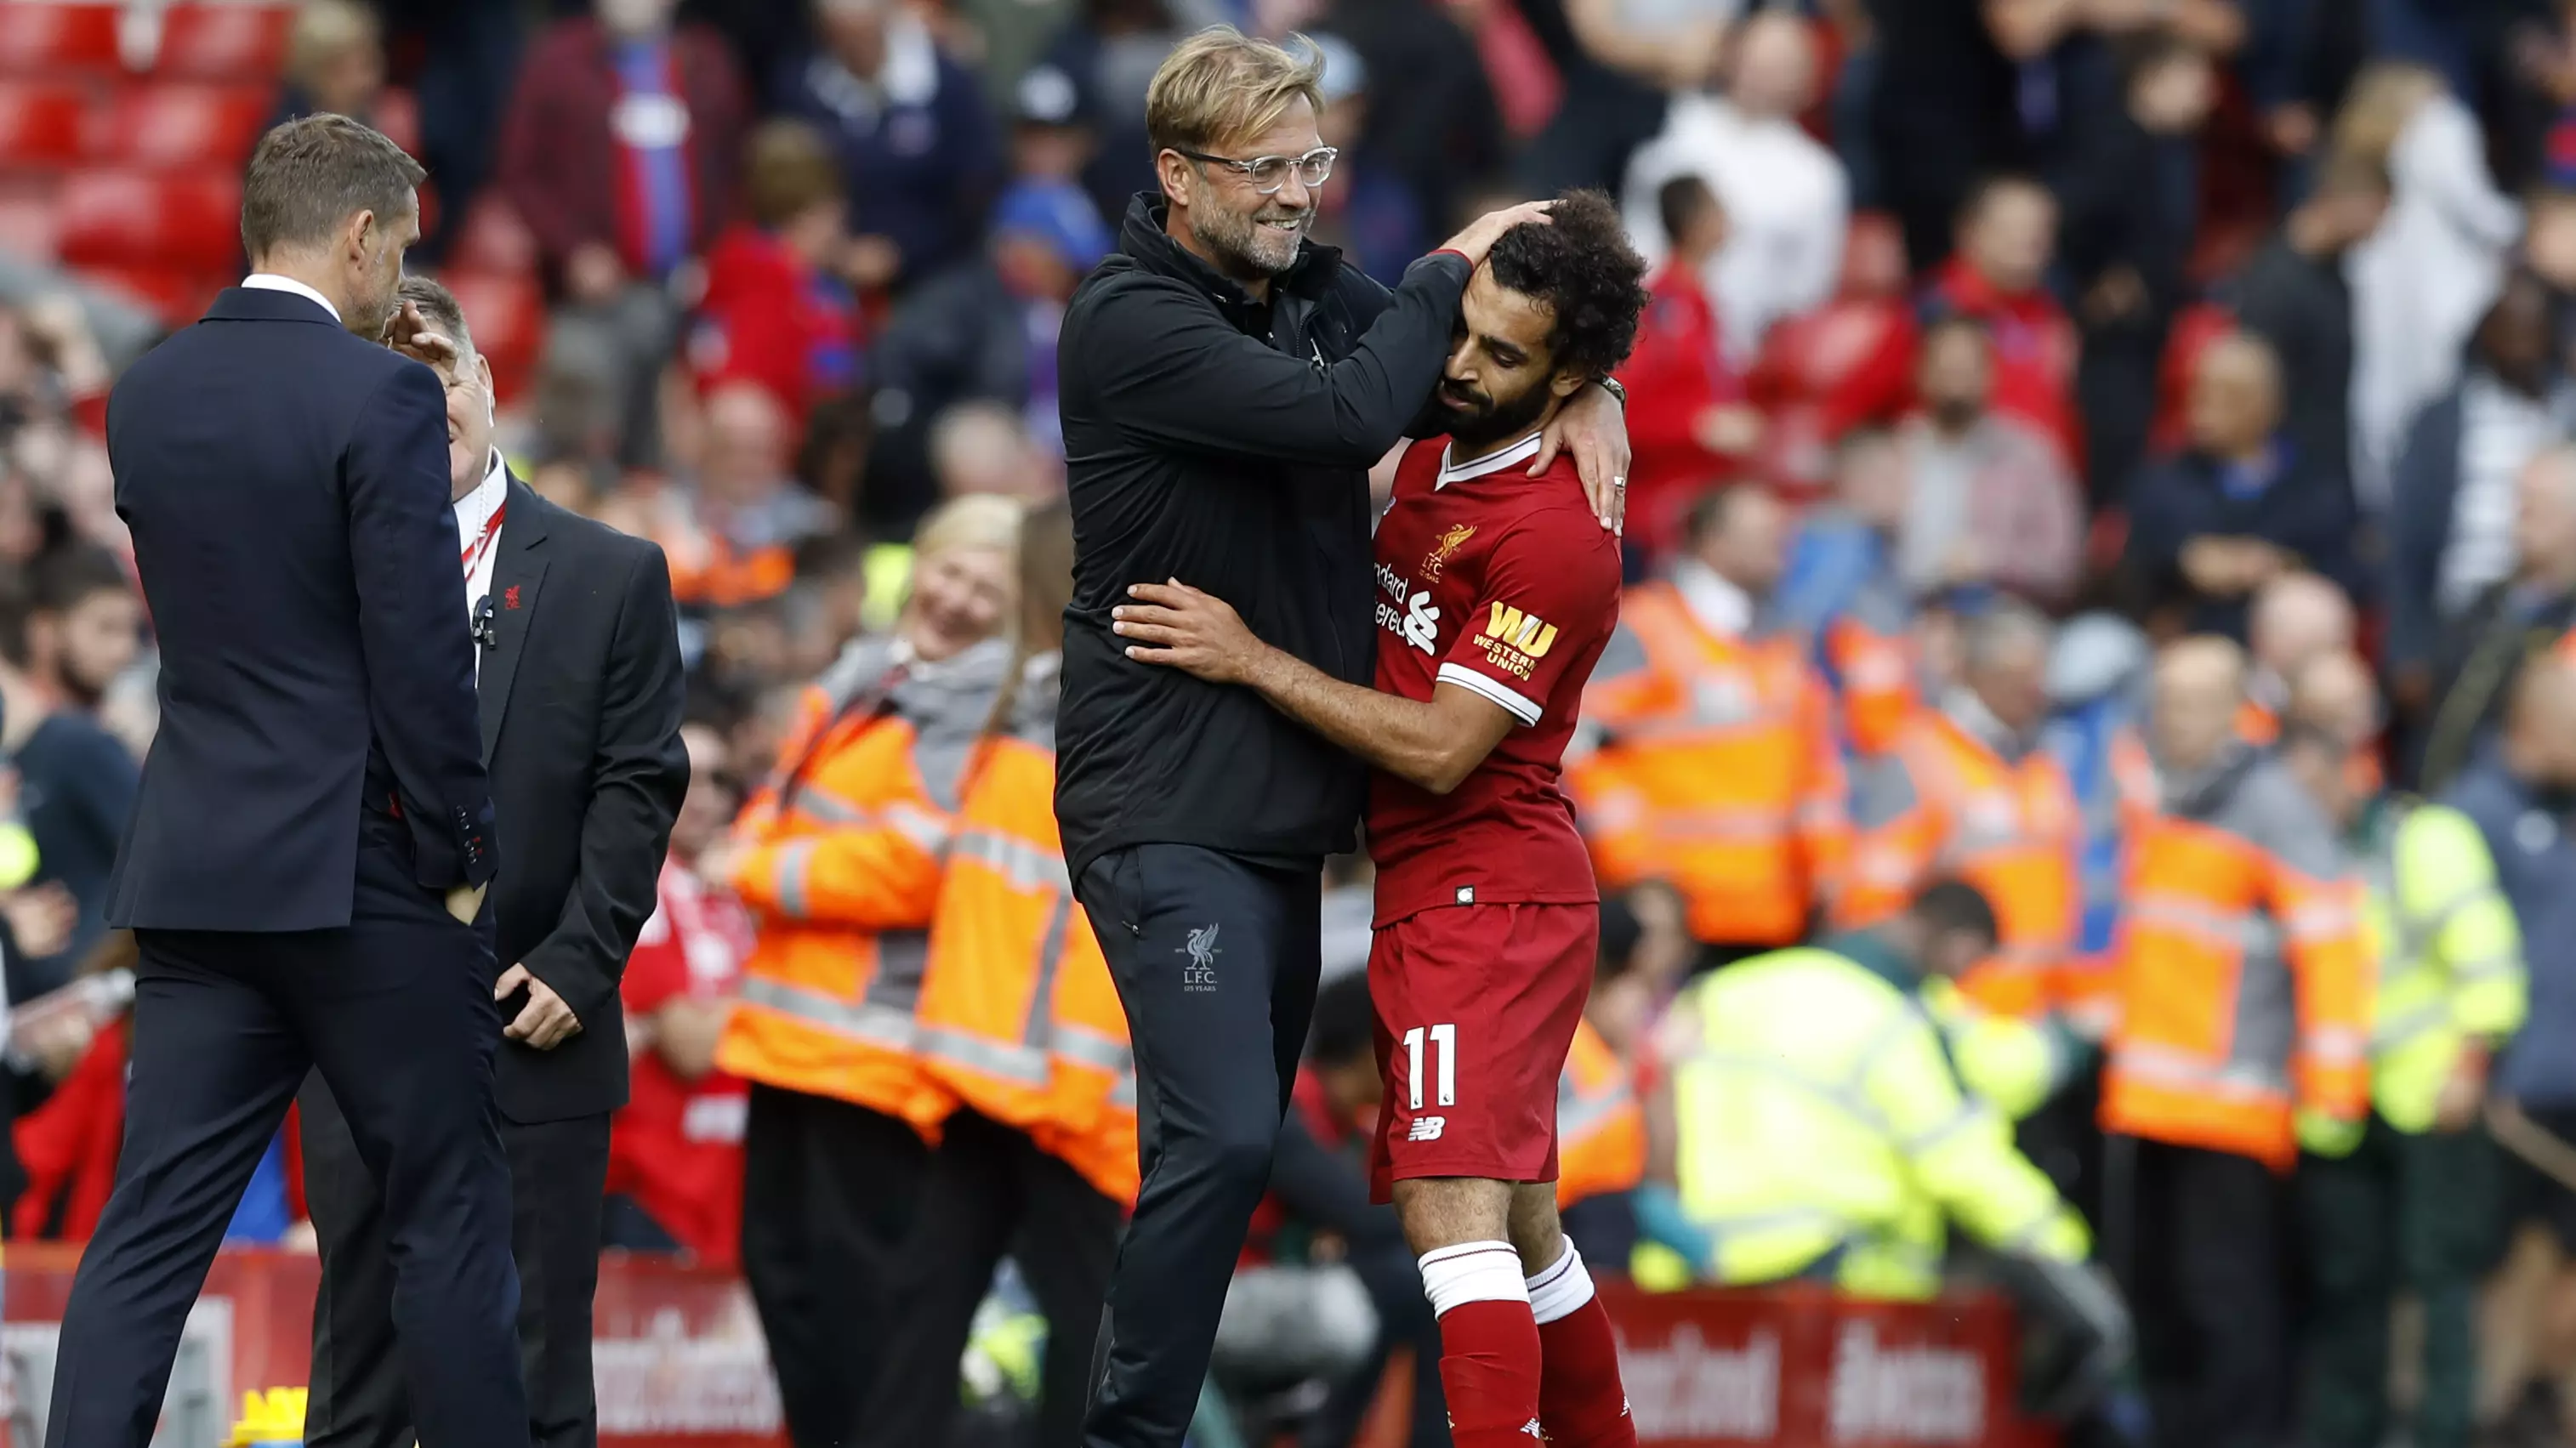 The Simple Bit Of Advice Klopp Gave Salah 45 Minutes Into His Liverpool Debut